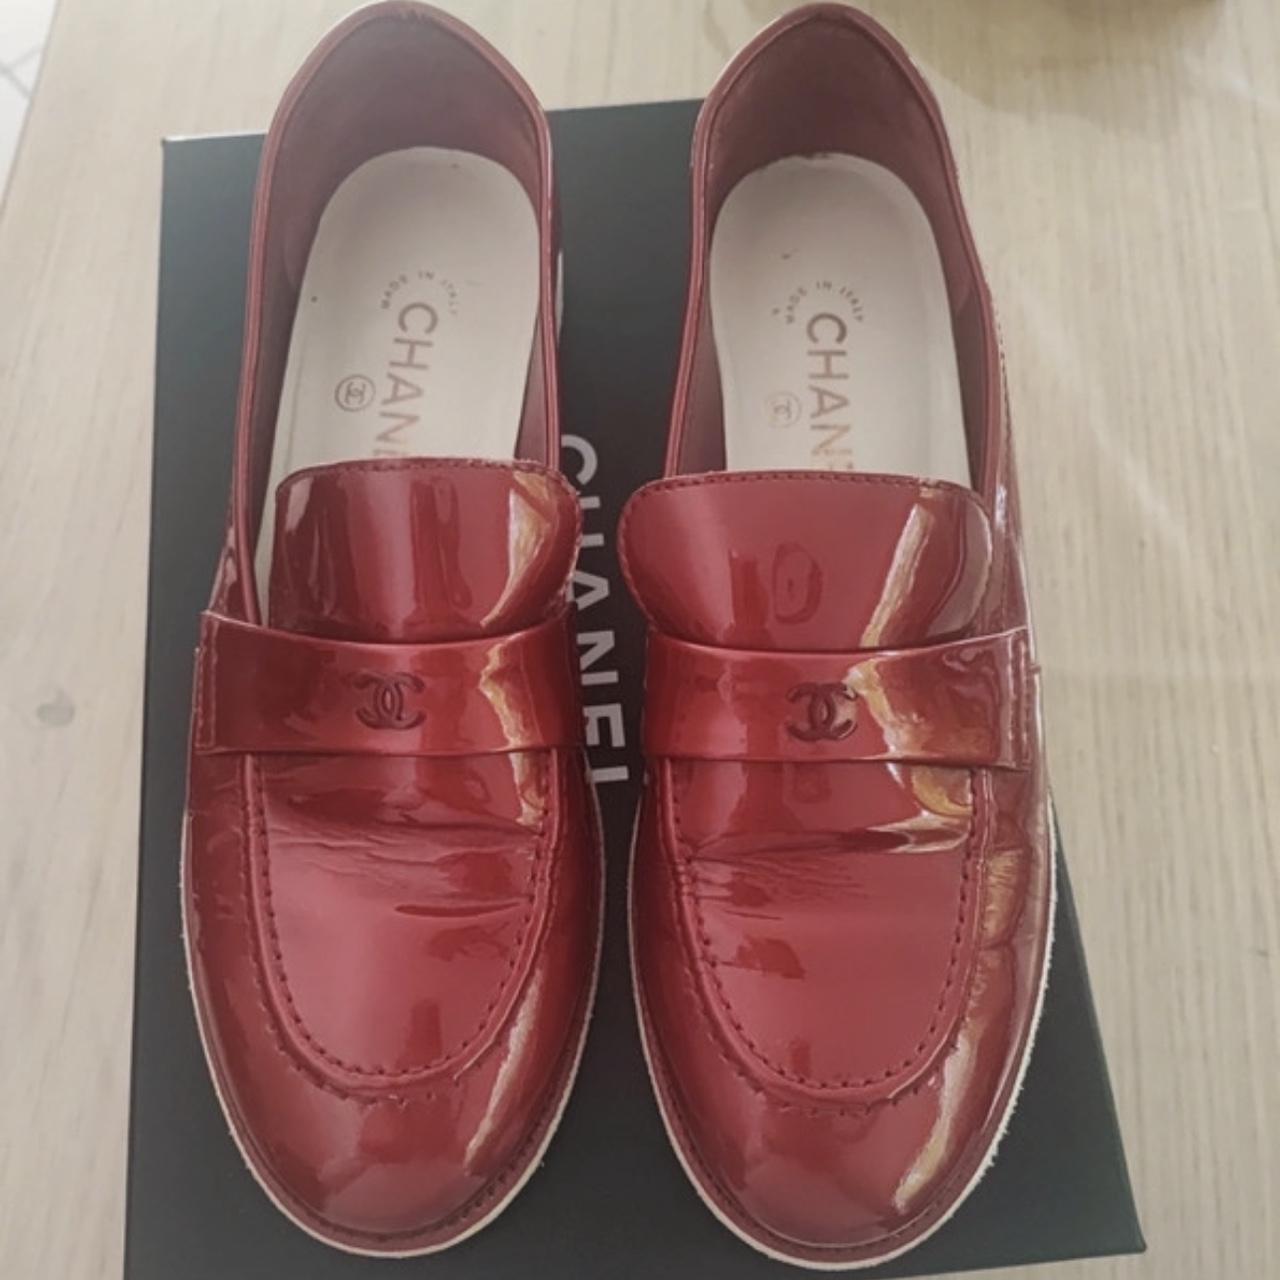 Chanel Women's Loafers - Red - US 7